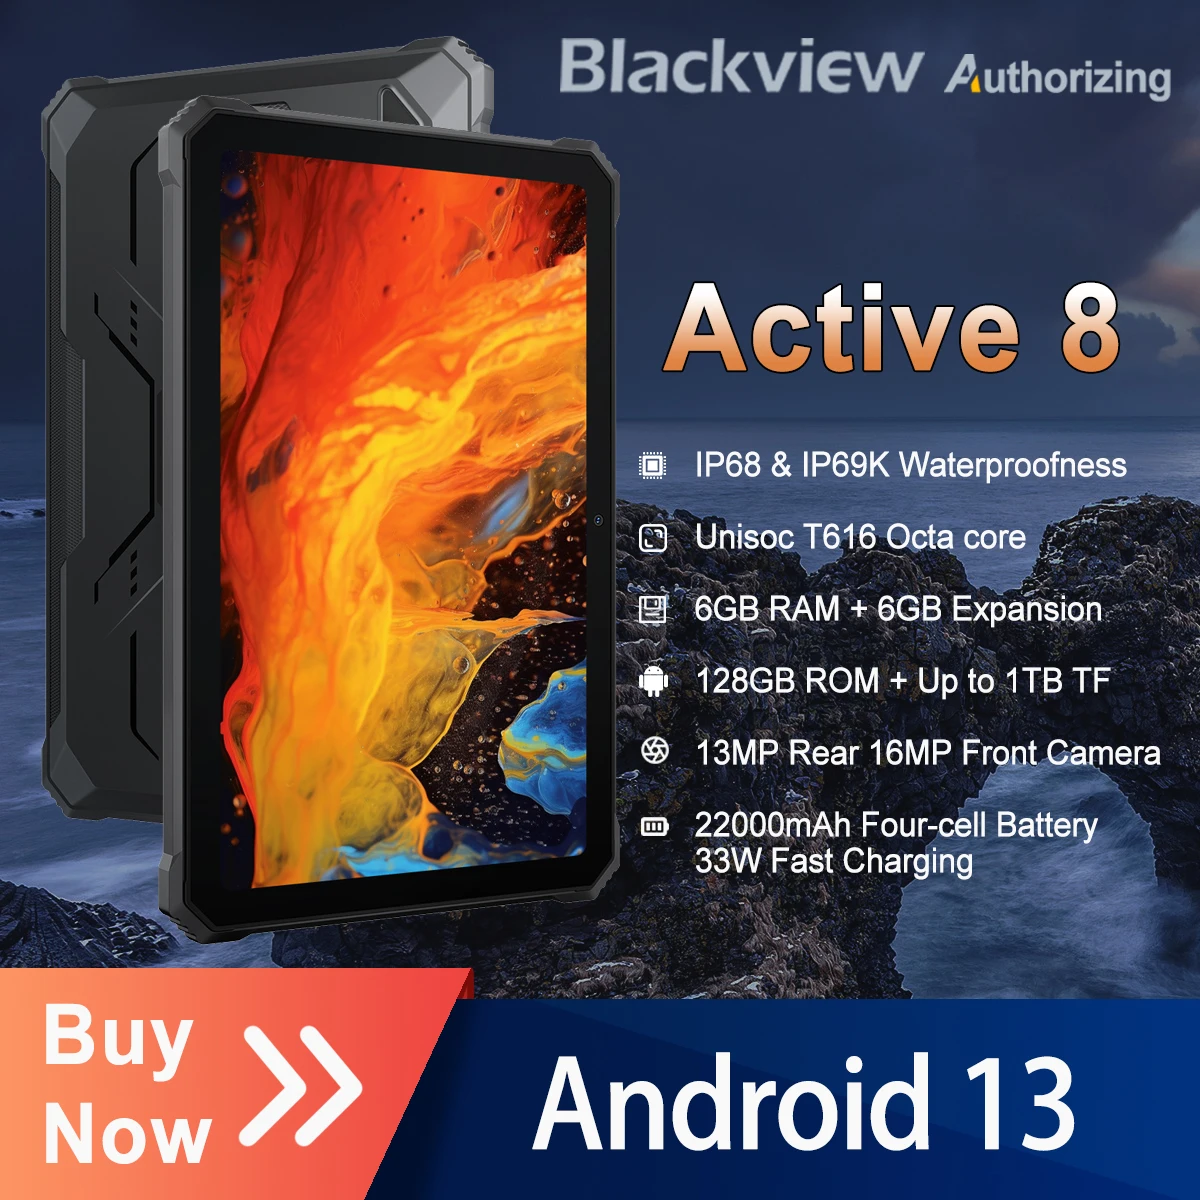 Blackview Active 8 Rugged Tablets Android 13 22000mAh Battery 33W Charging  10.36'' 2.4K Display T616 Octa Core Tablets PC - AliExpress